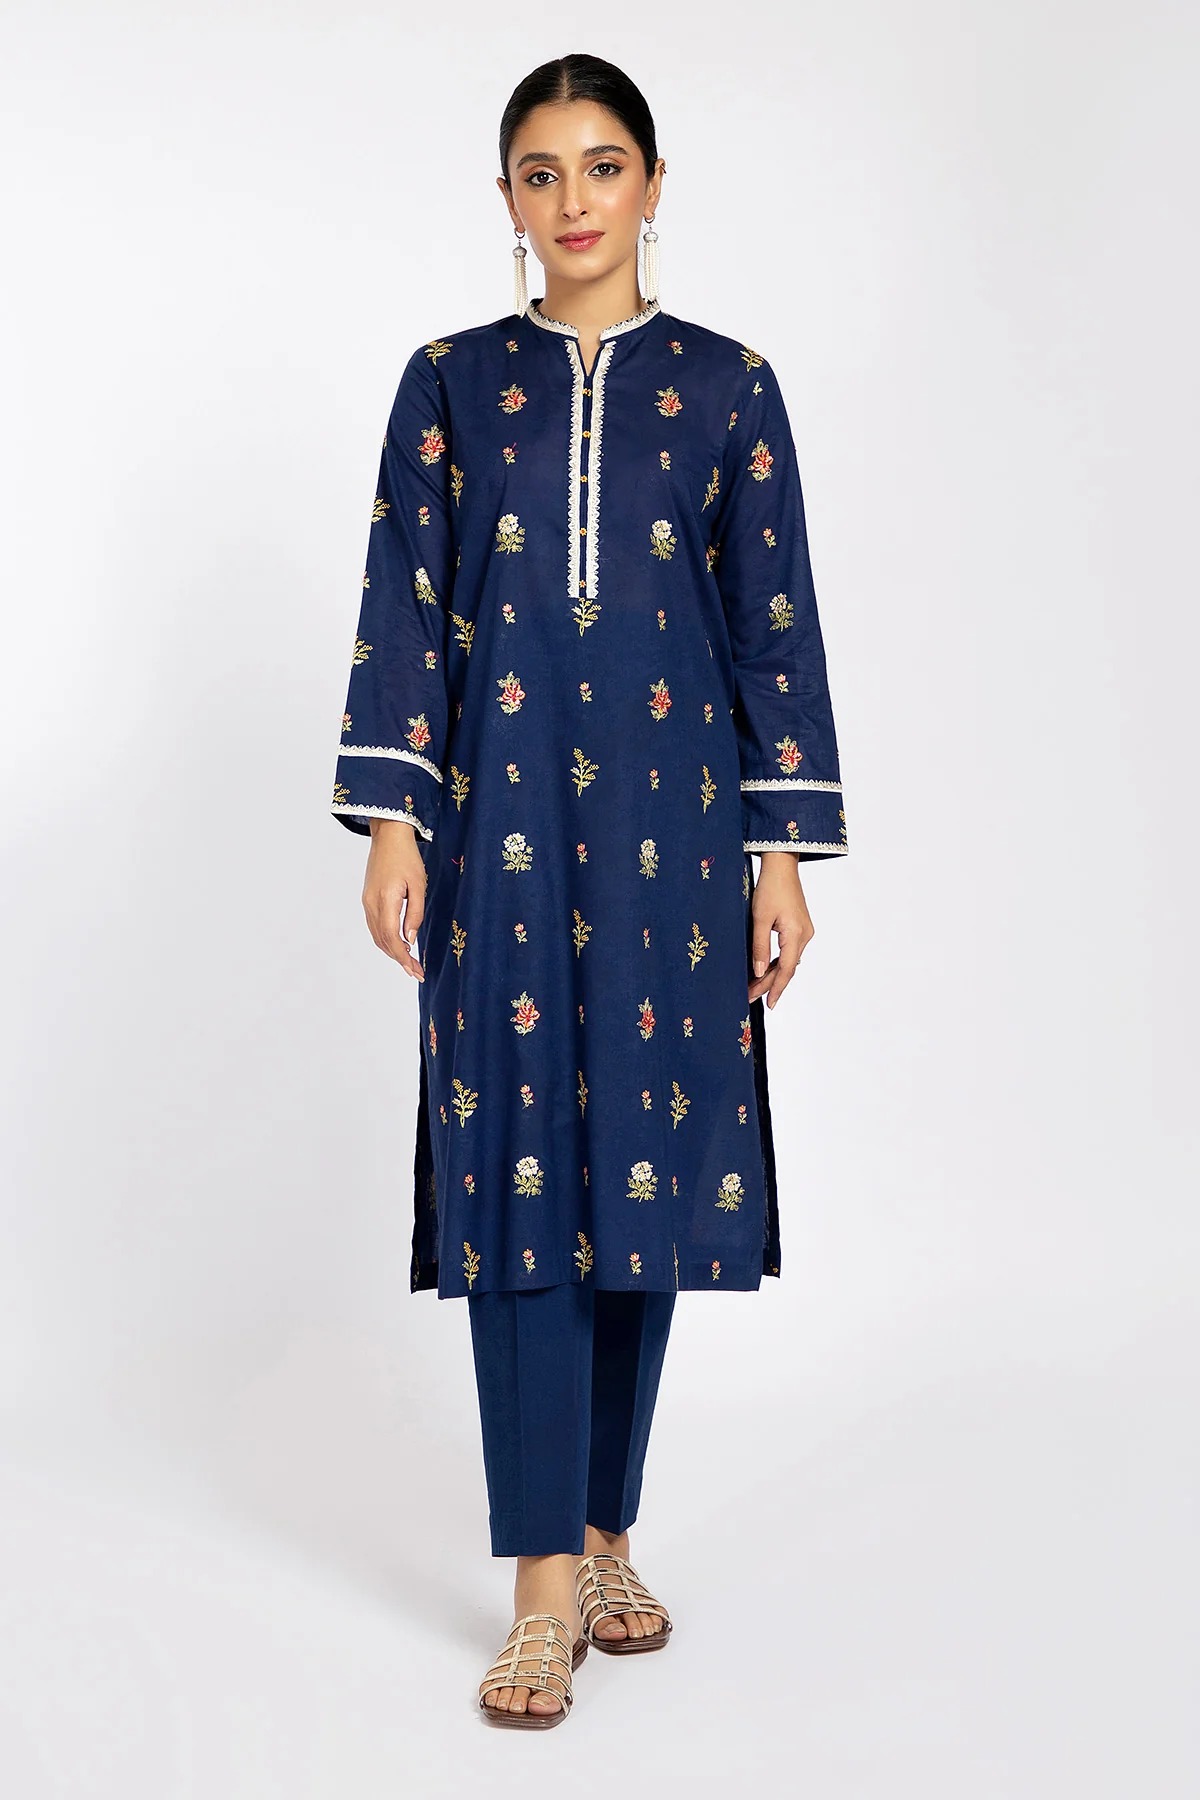 Embroidered Cotton Lawn 2 piece